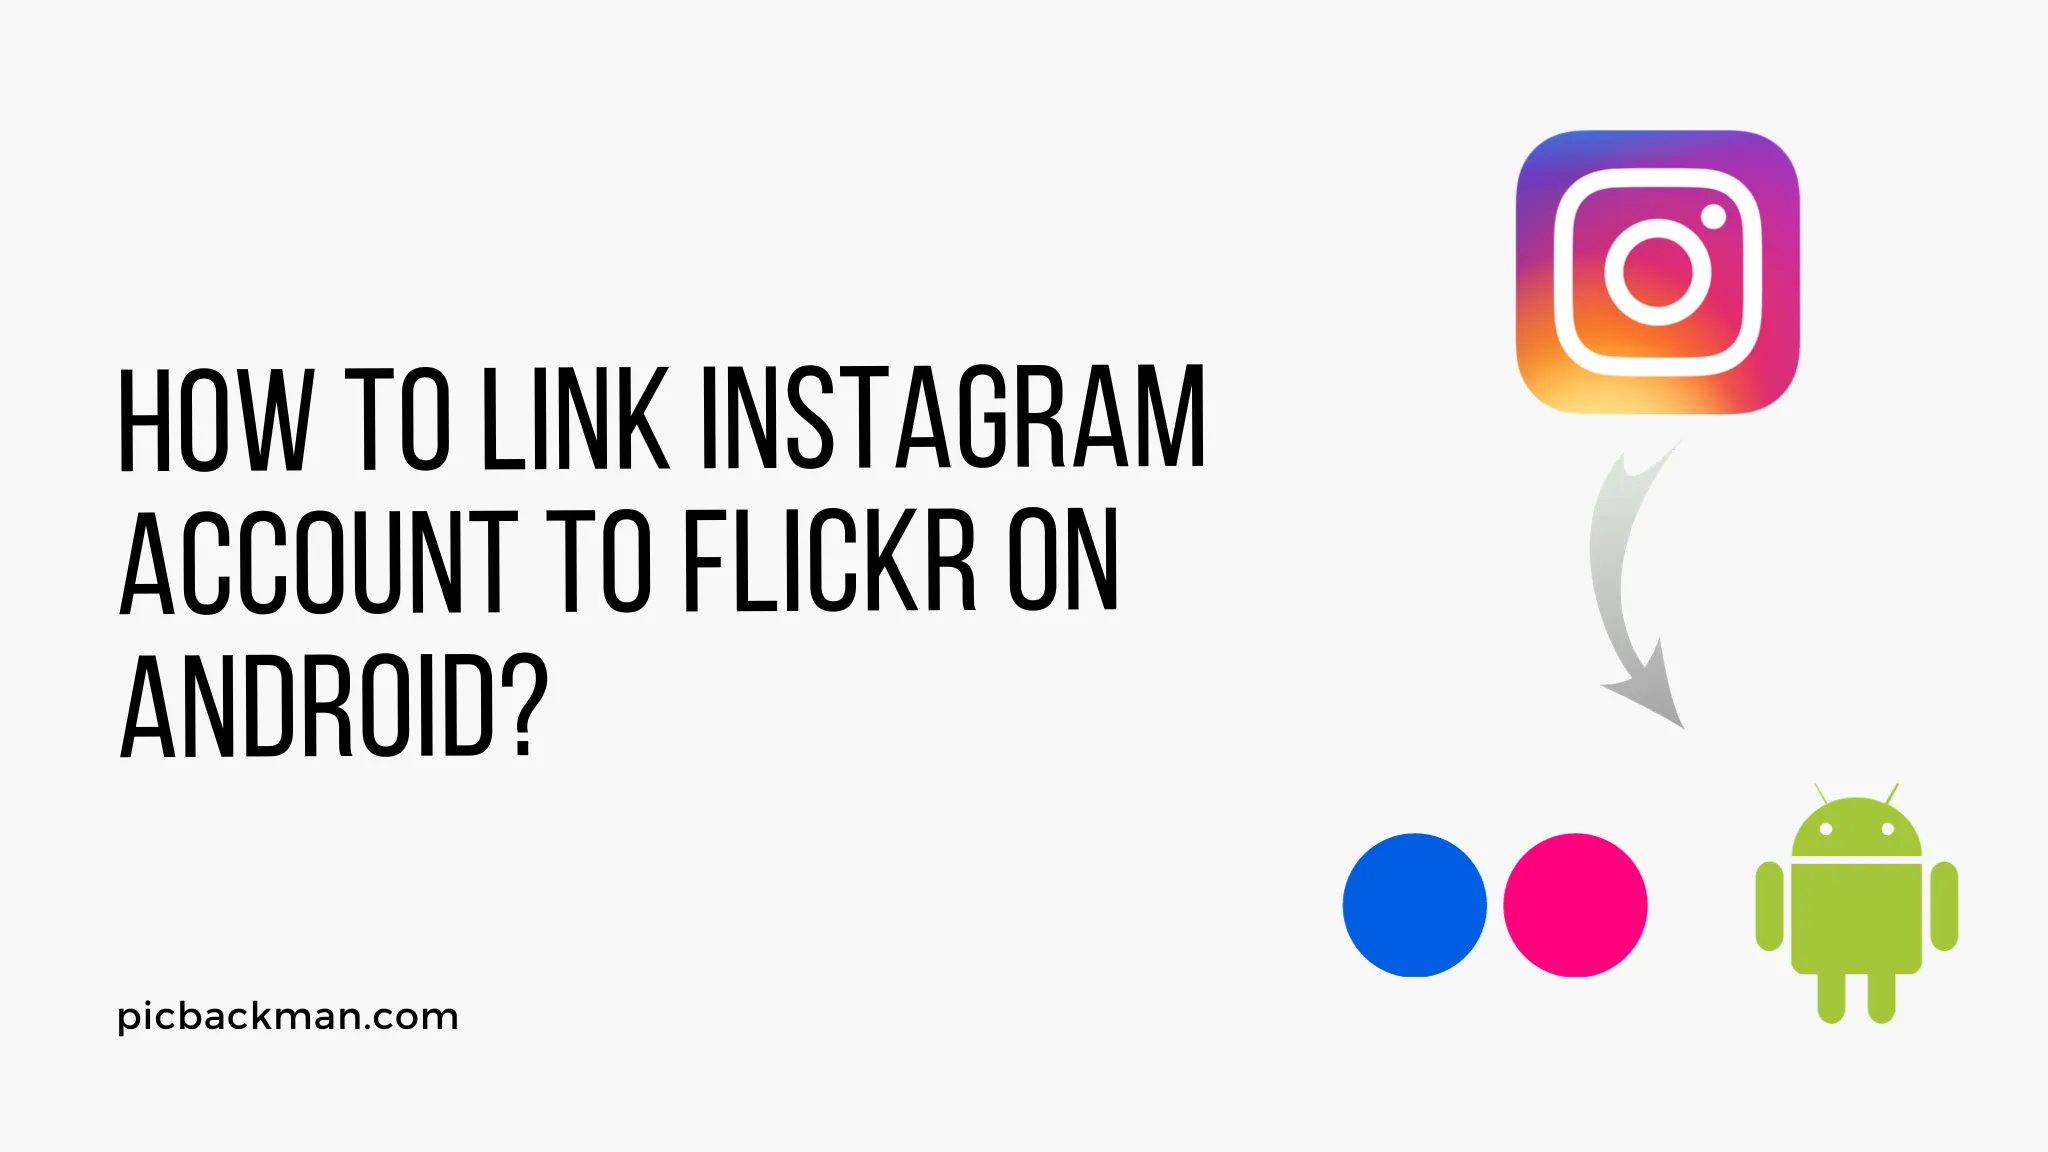 How to Link Instagram Account to Flickr on Android